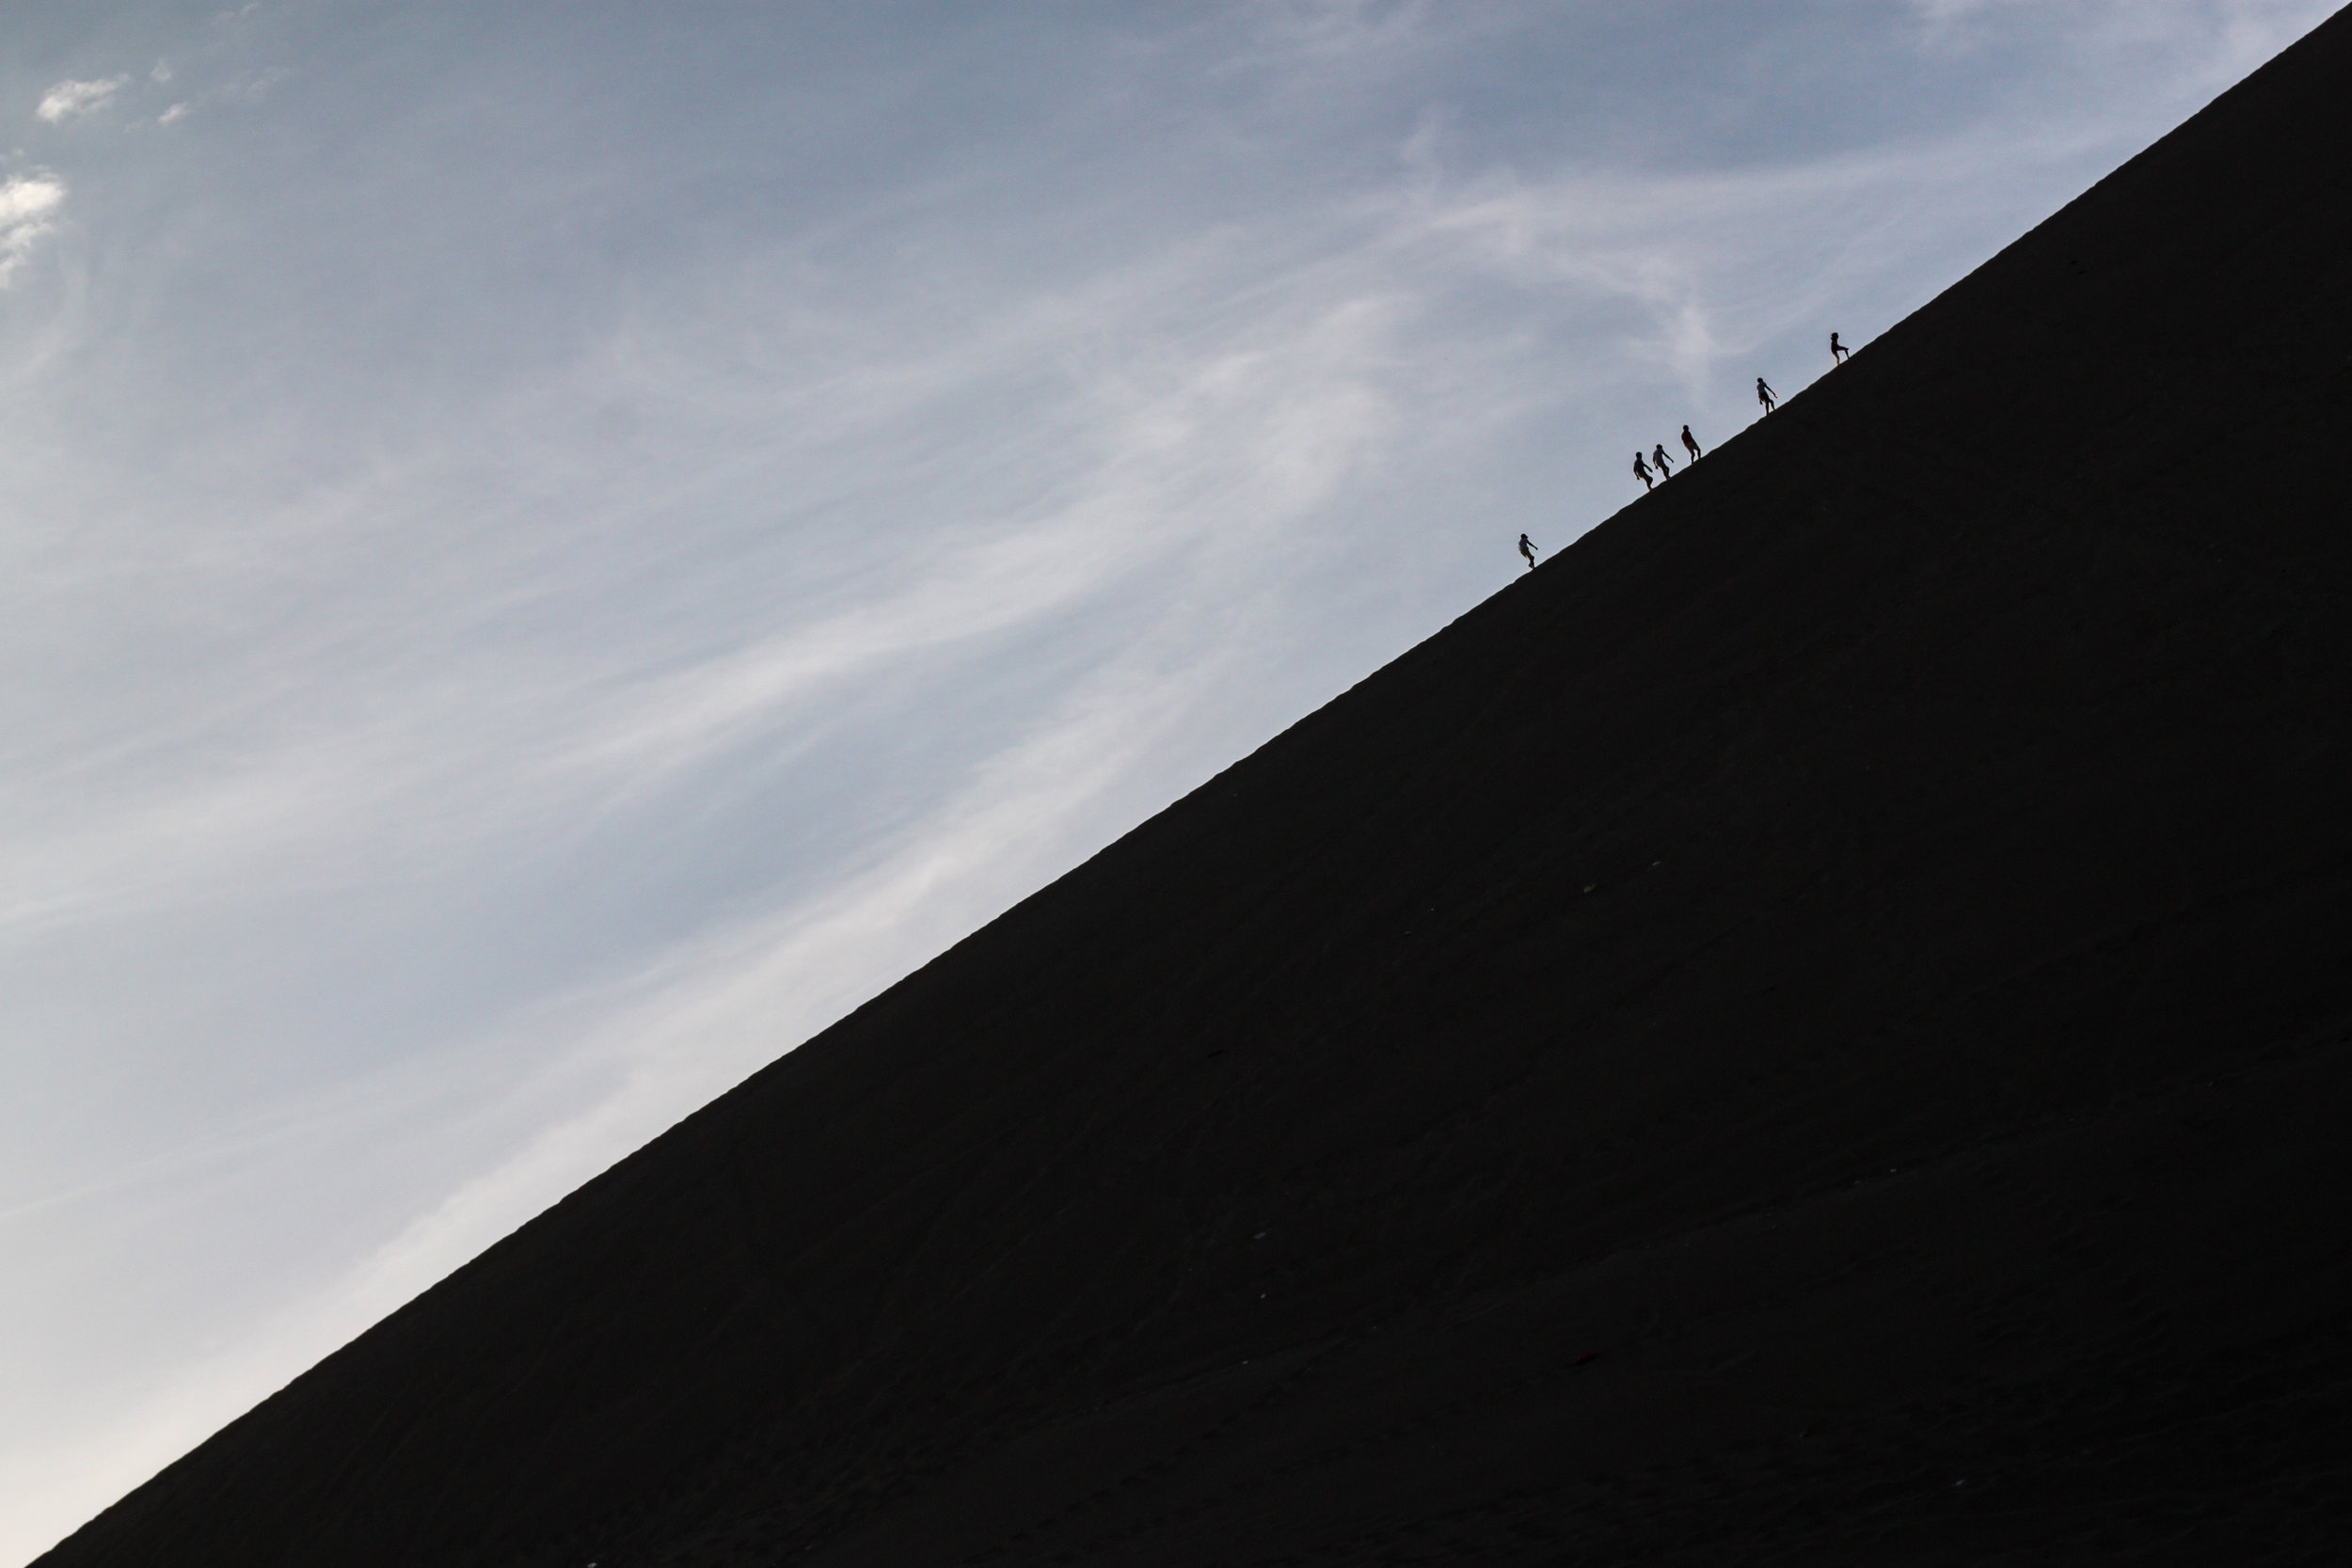 Silhouette travel photography in Ica, Peru by Geraint Rowland.